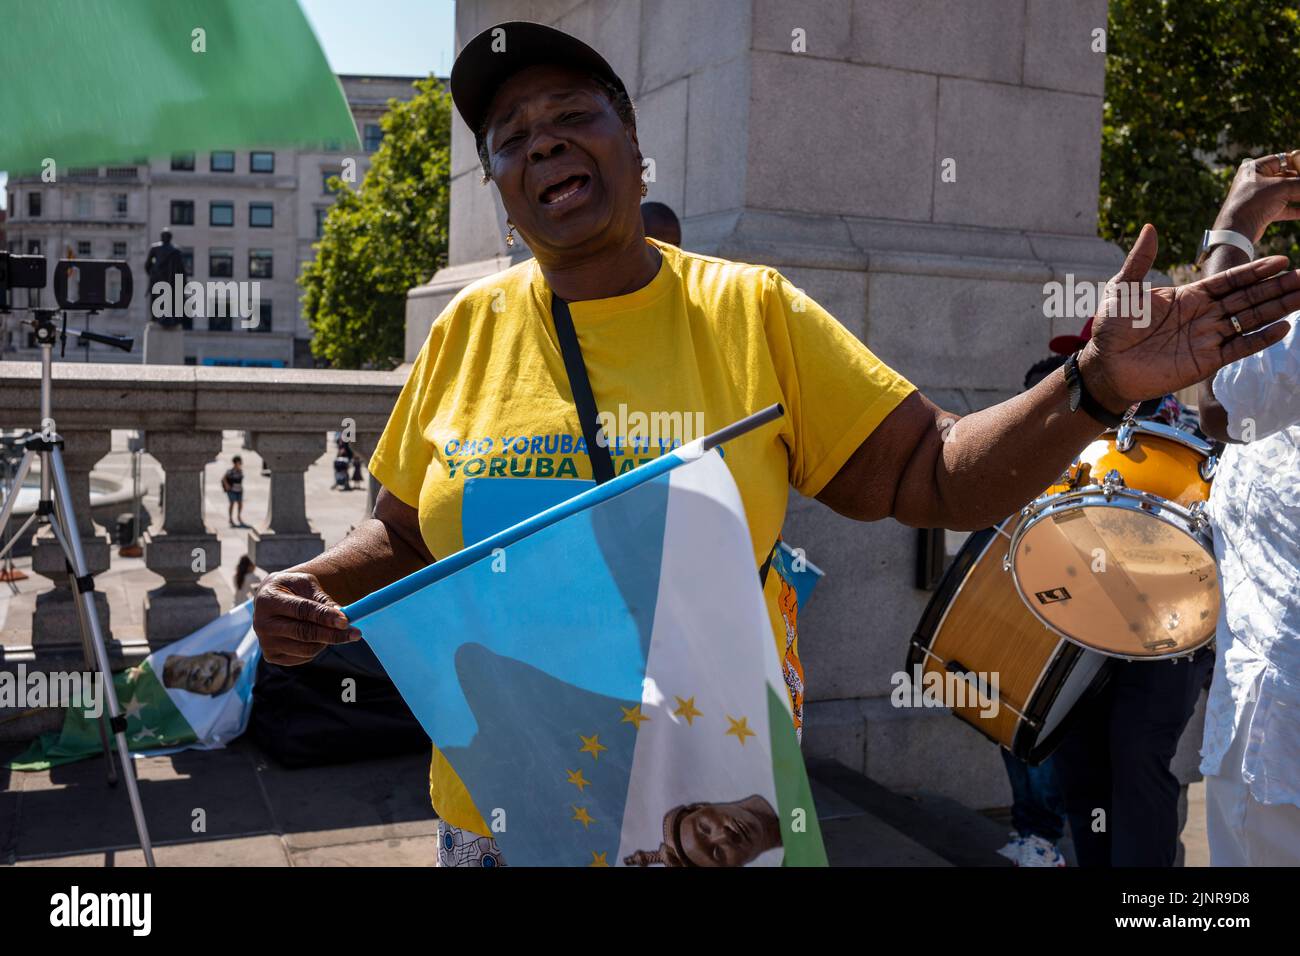 13 August 2022, Trafalgar Square London UK. People of the Yoruba Nation, who live in parts of Nigeria protesting with music against conditions in Nigeria: No democracy, no justice, Buhari's government is dead, and that Buhari is a terrorist. Stock Photo